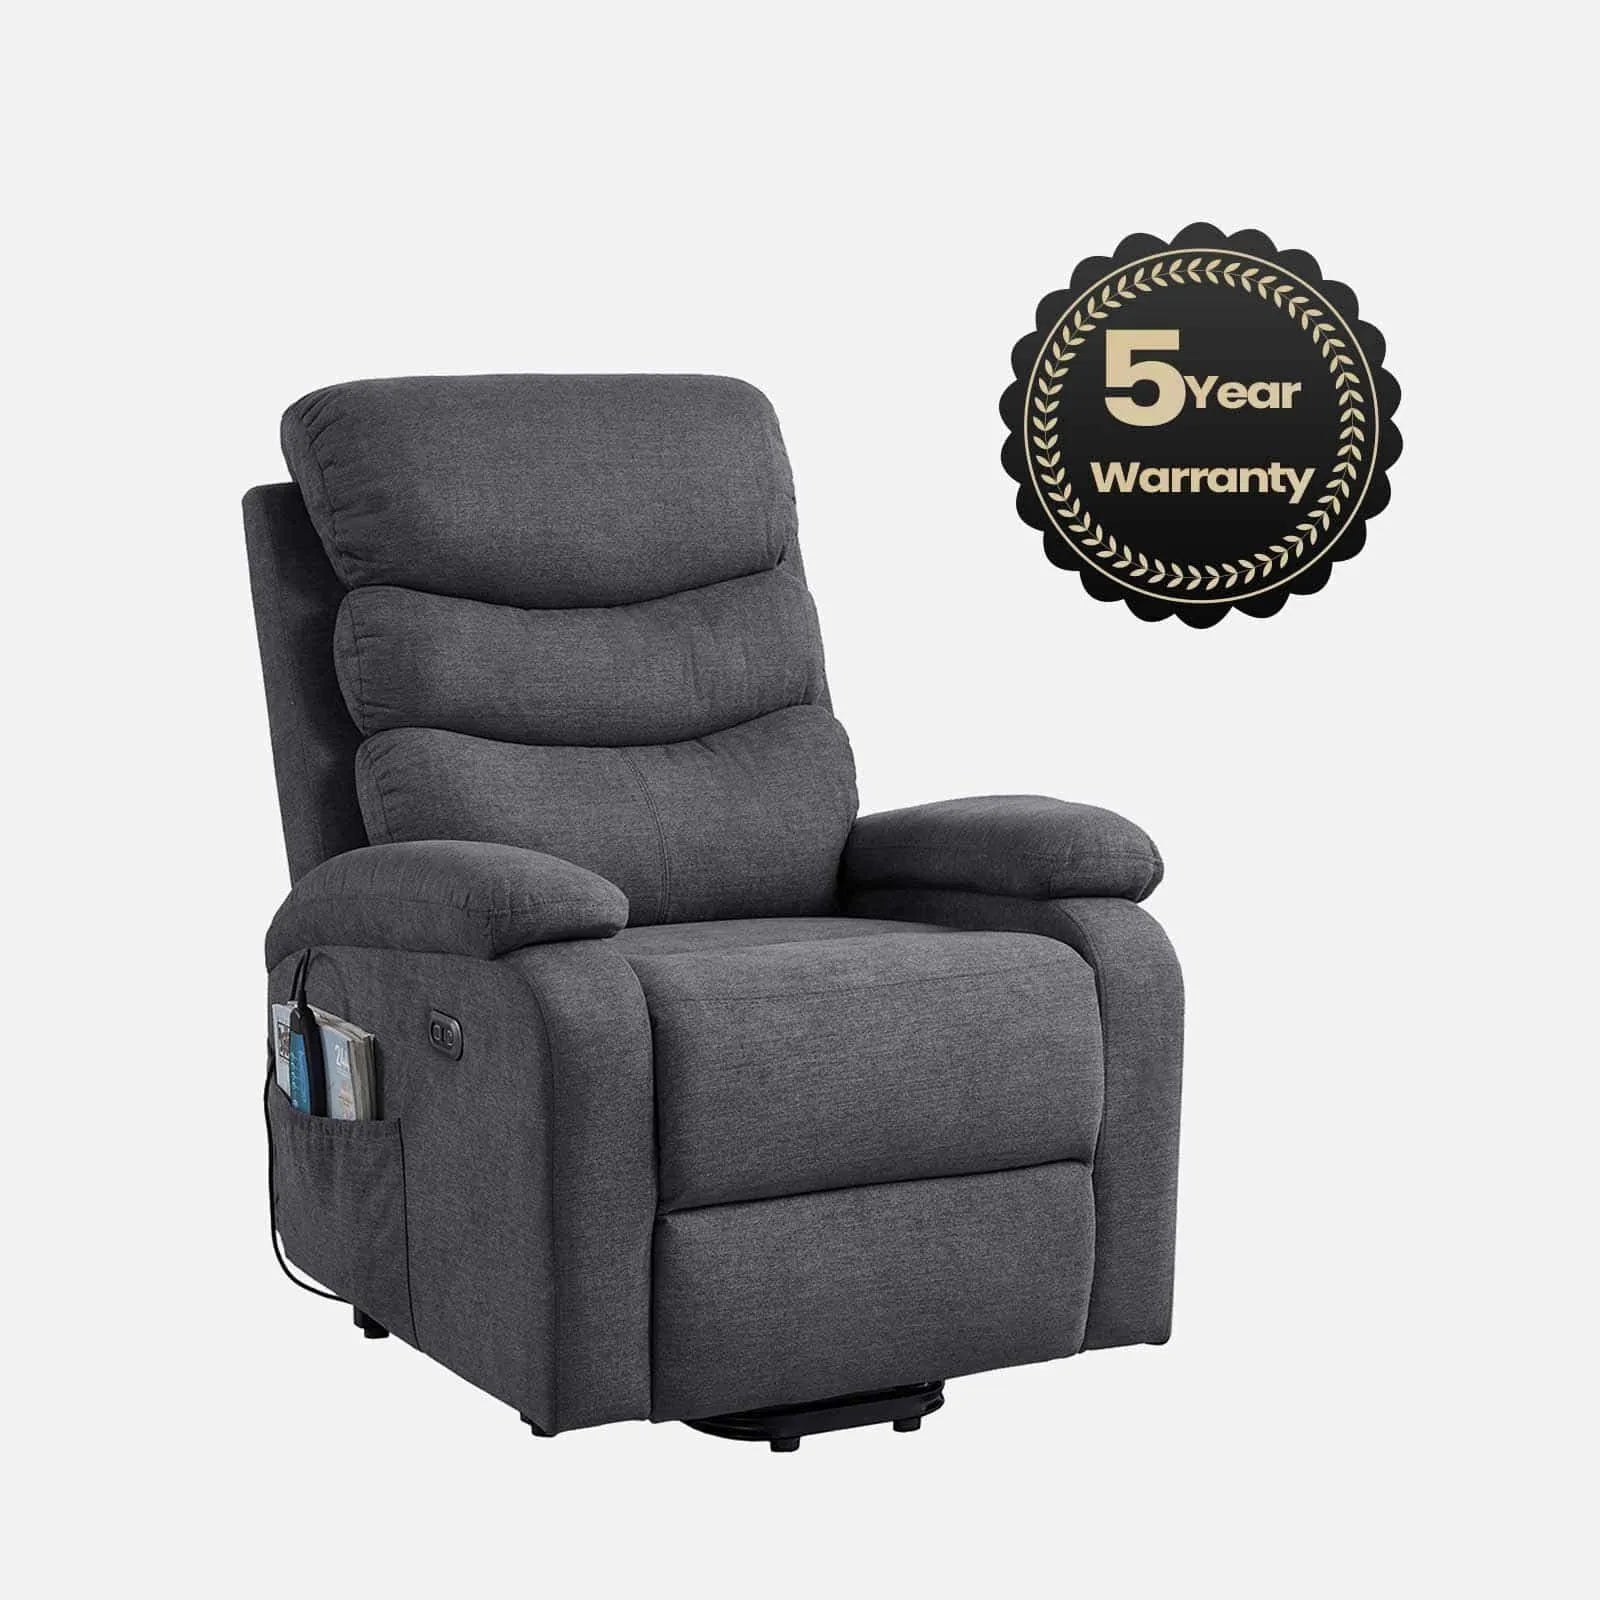 fabric lift recliner chair with 5 year warranty